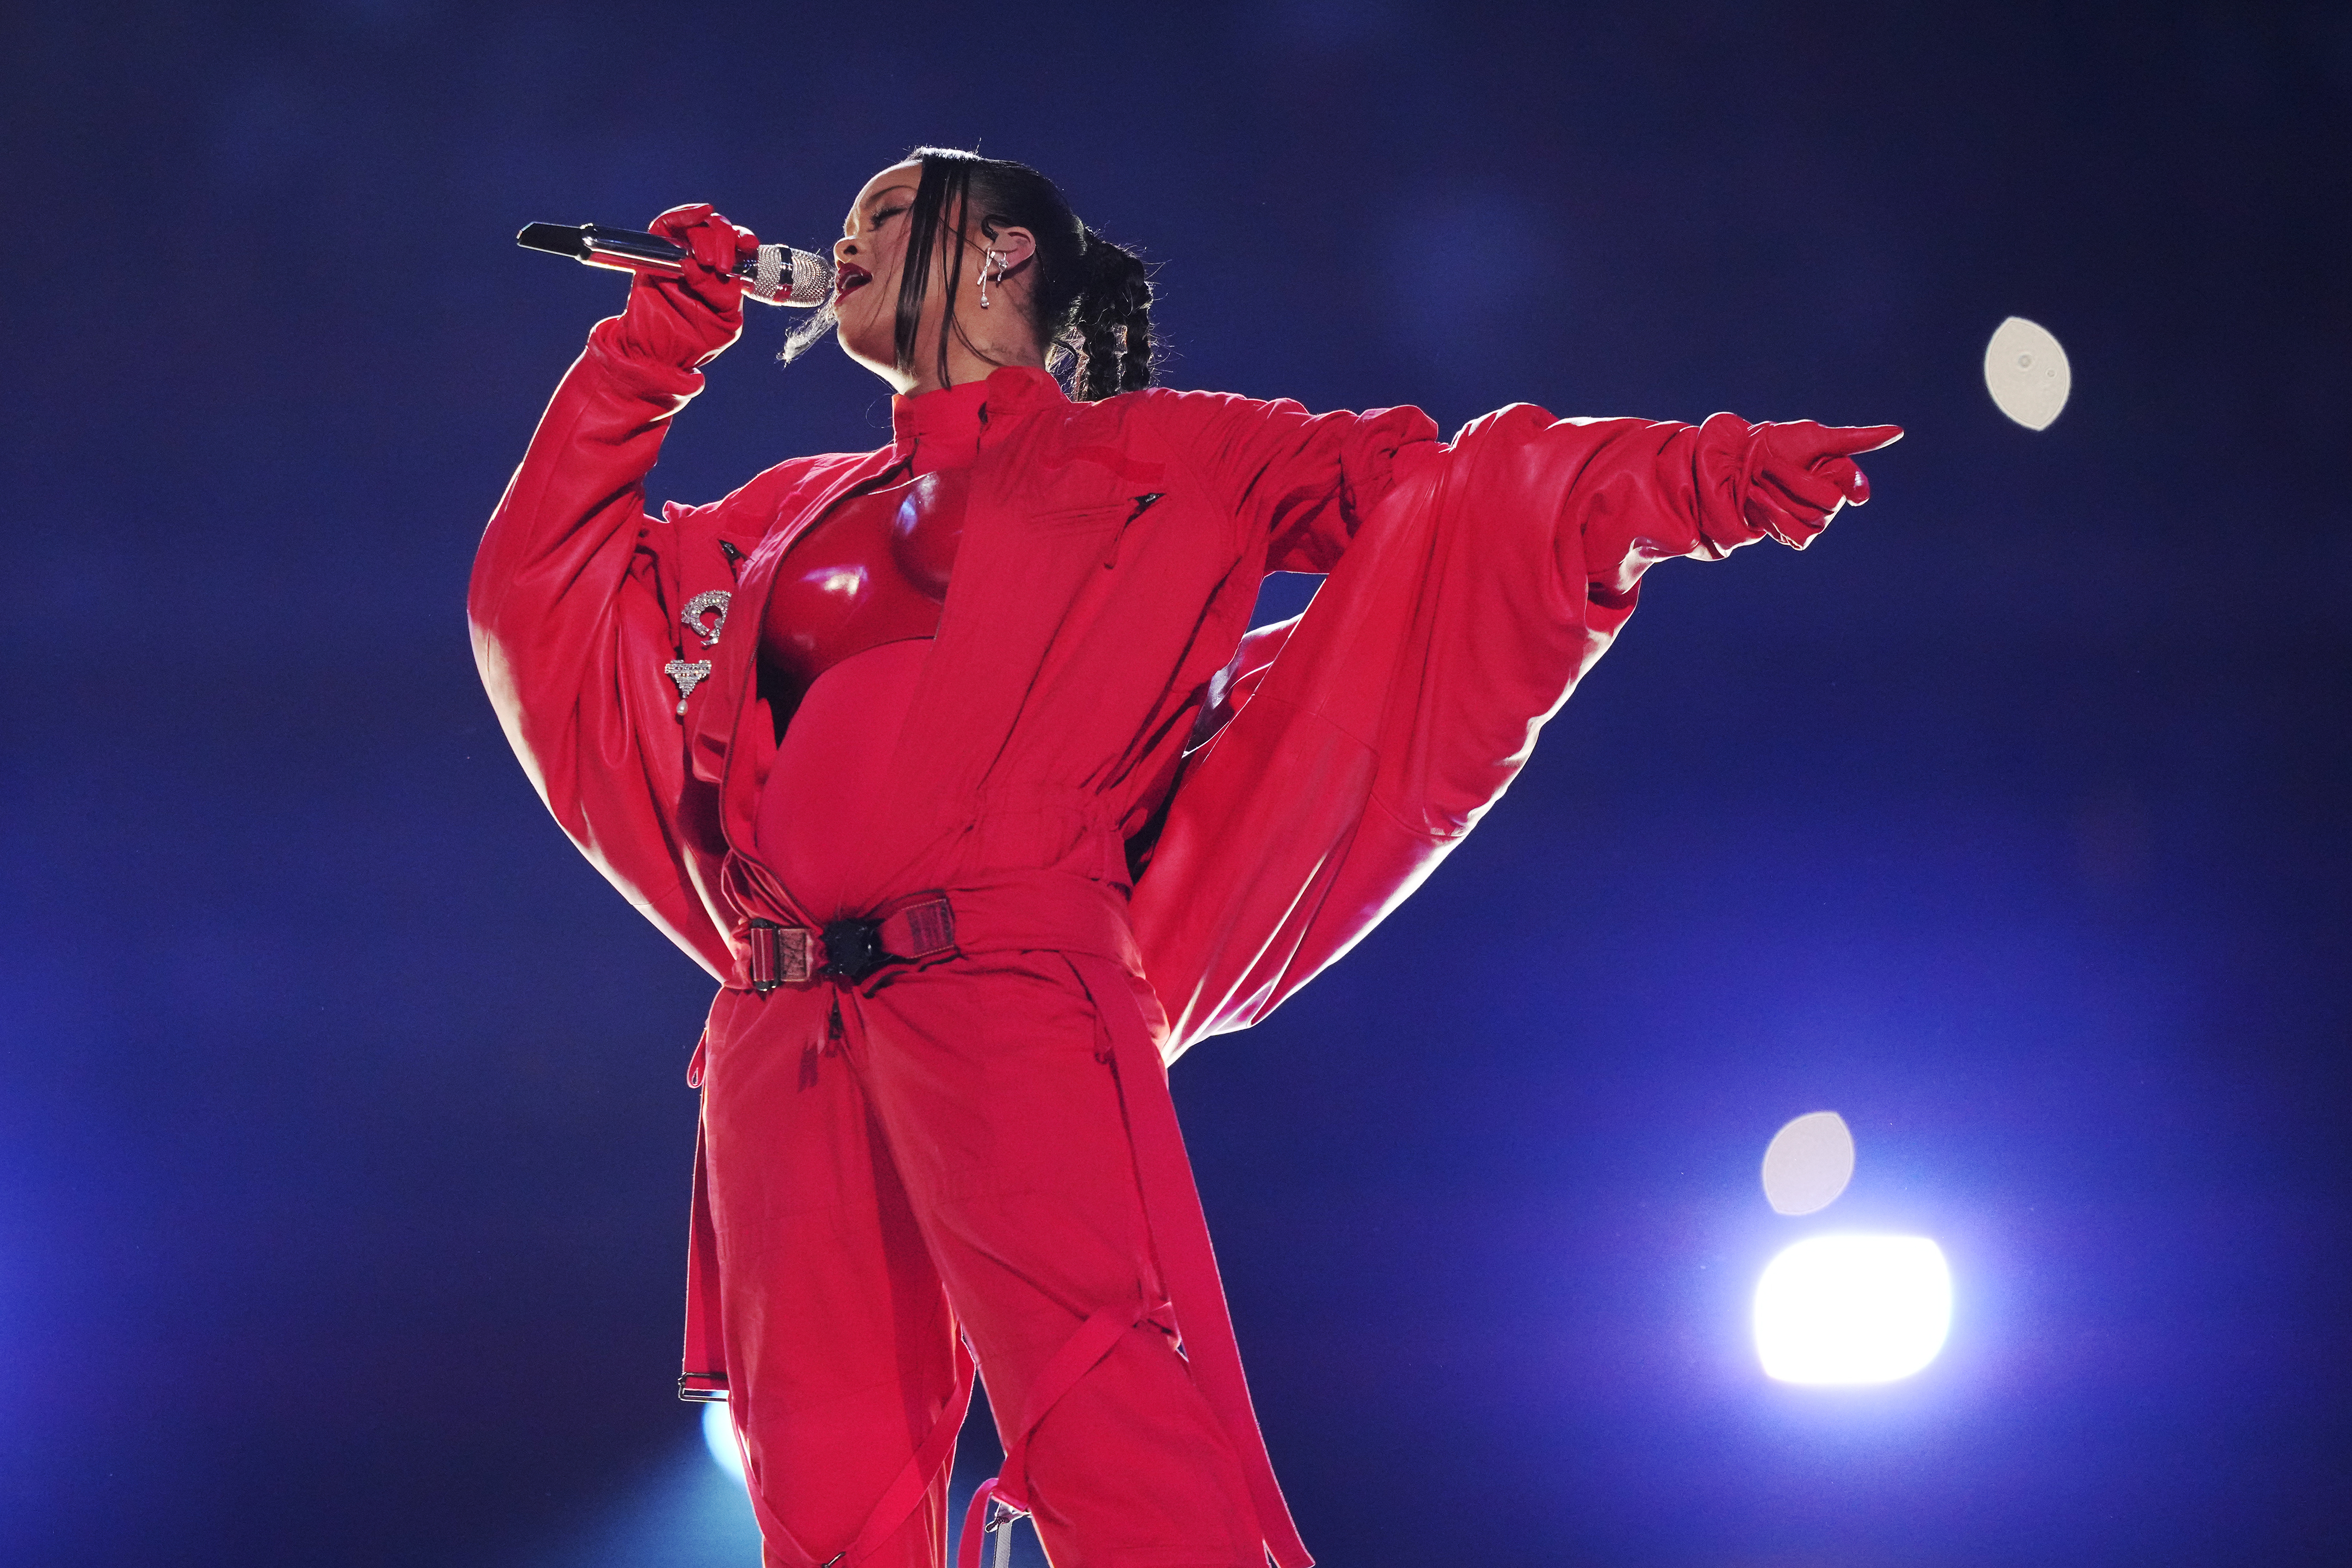 Rihanna soars in Super Bowl halftime performance - WHYY